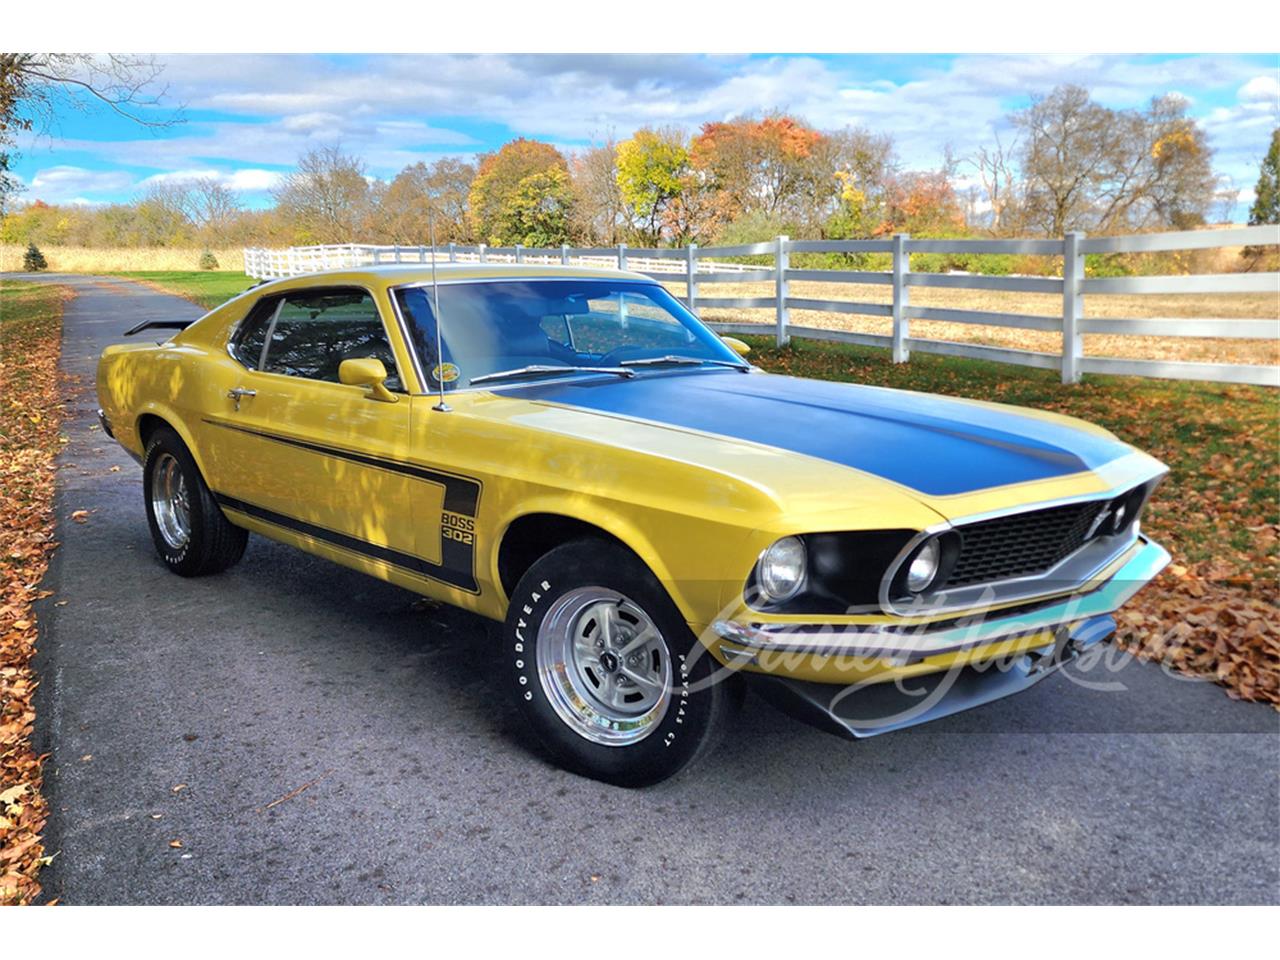 For Sale at Auction: 1969 Ford Mustang Boss 302 in Scottsdale, Arizona for sale in Scottsdale, AZ